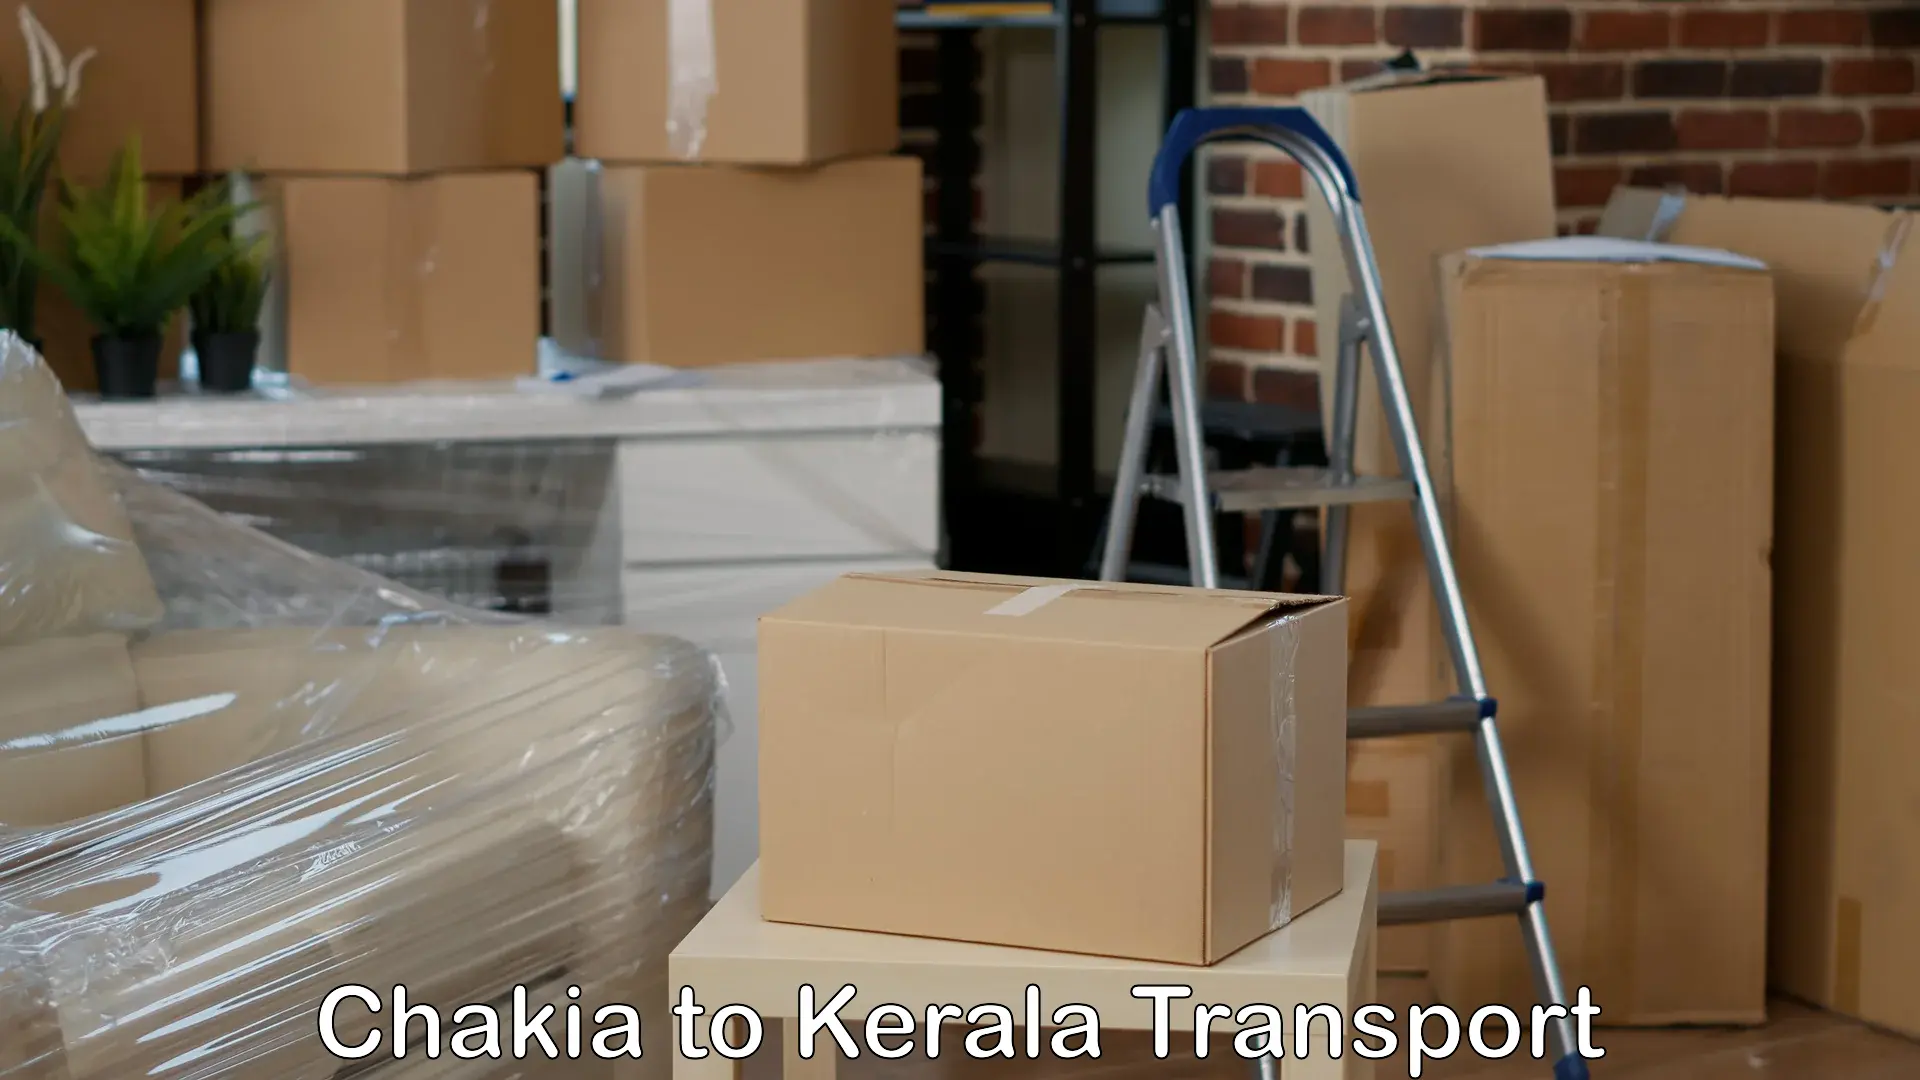 Container transport service Chakia to Kochi